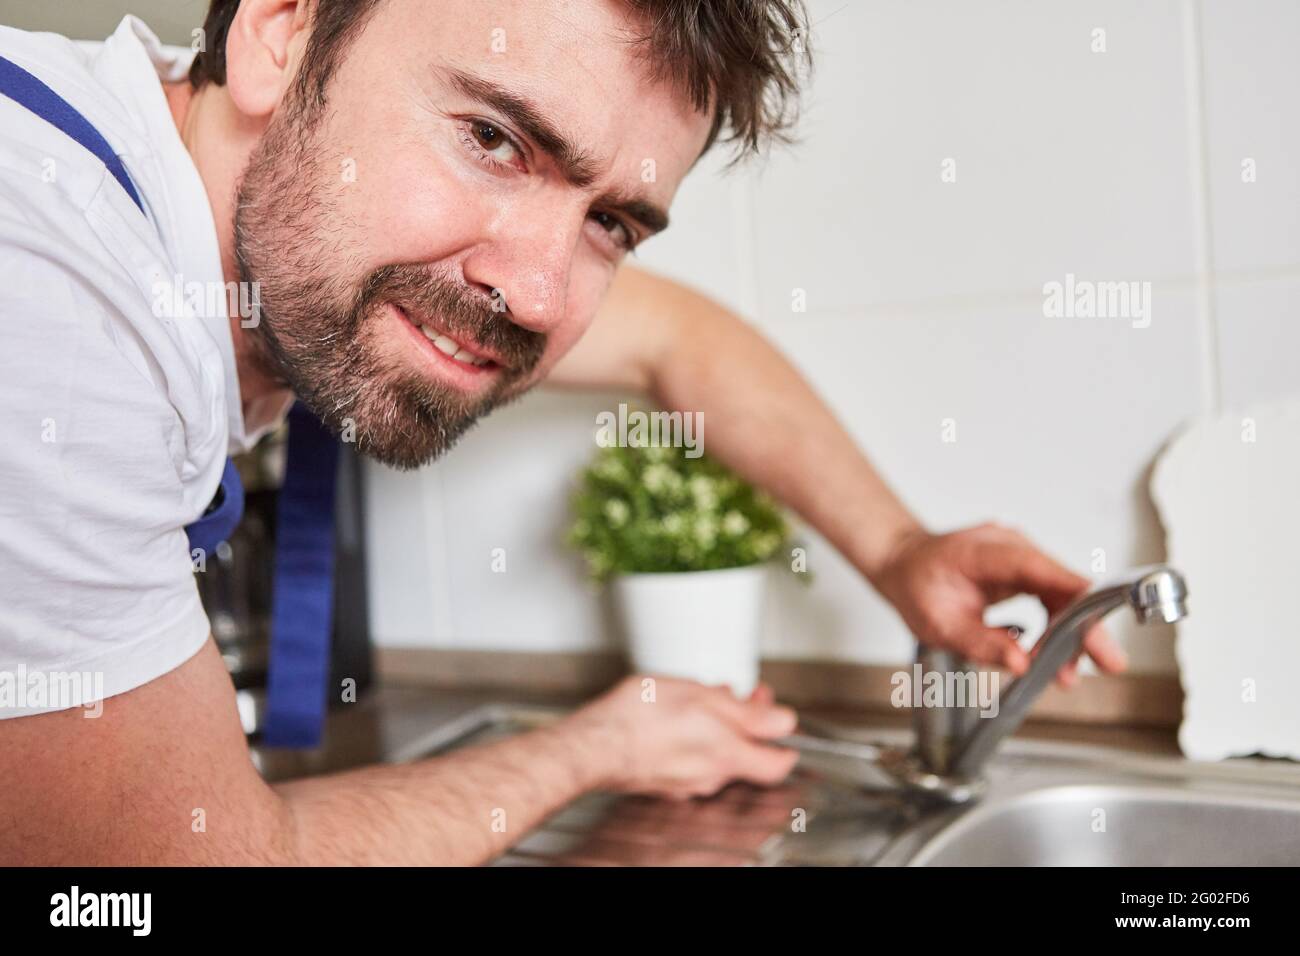 Plumber connecting kitchen faucets to the sink in a kitchen Stock Photo